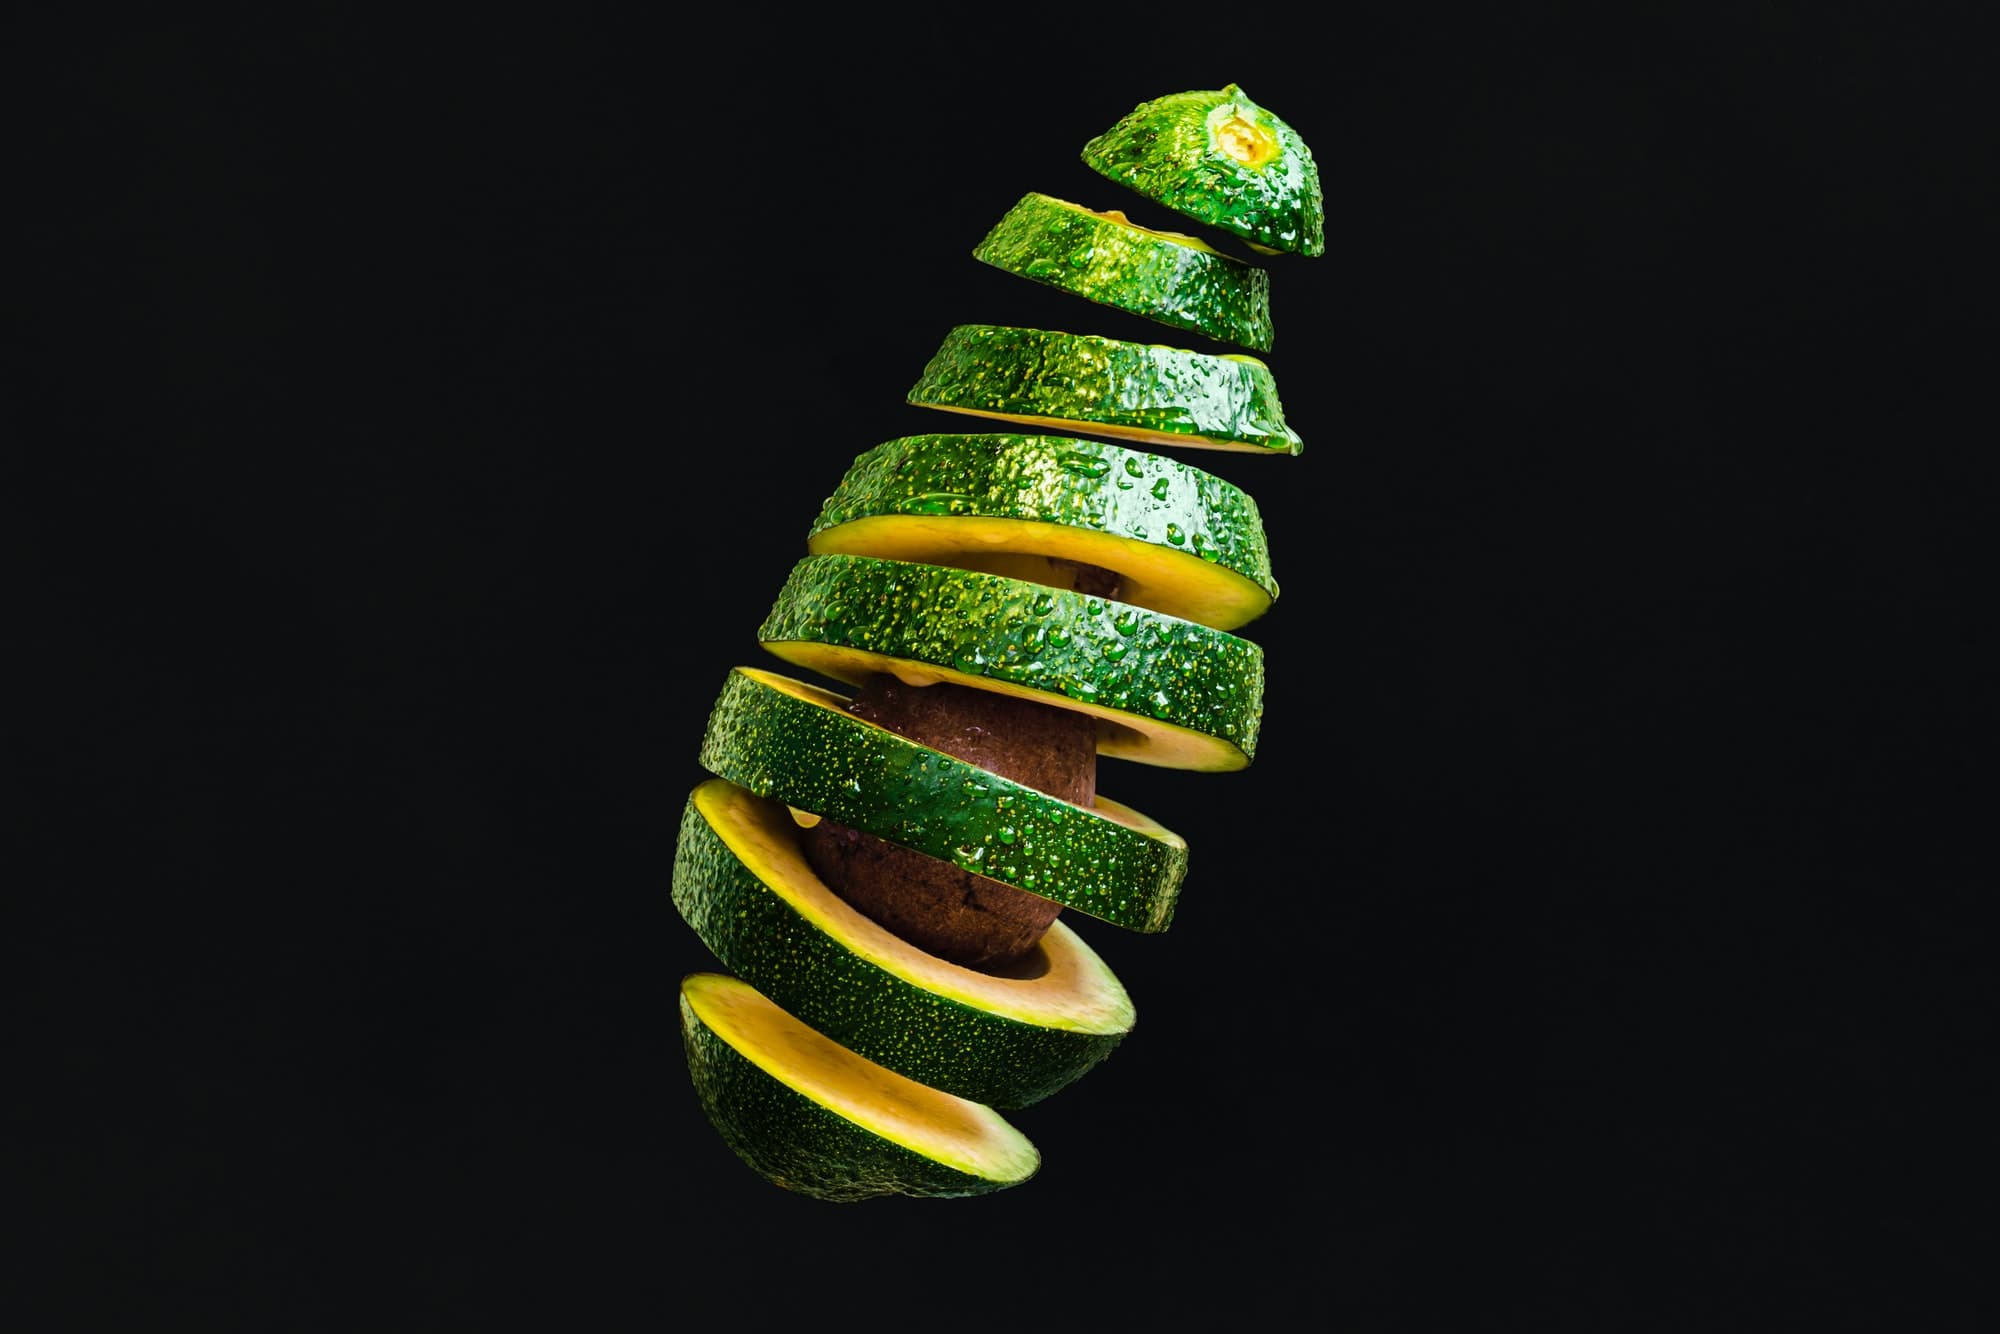 Avocado fruit cut into slices on top of black background.